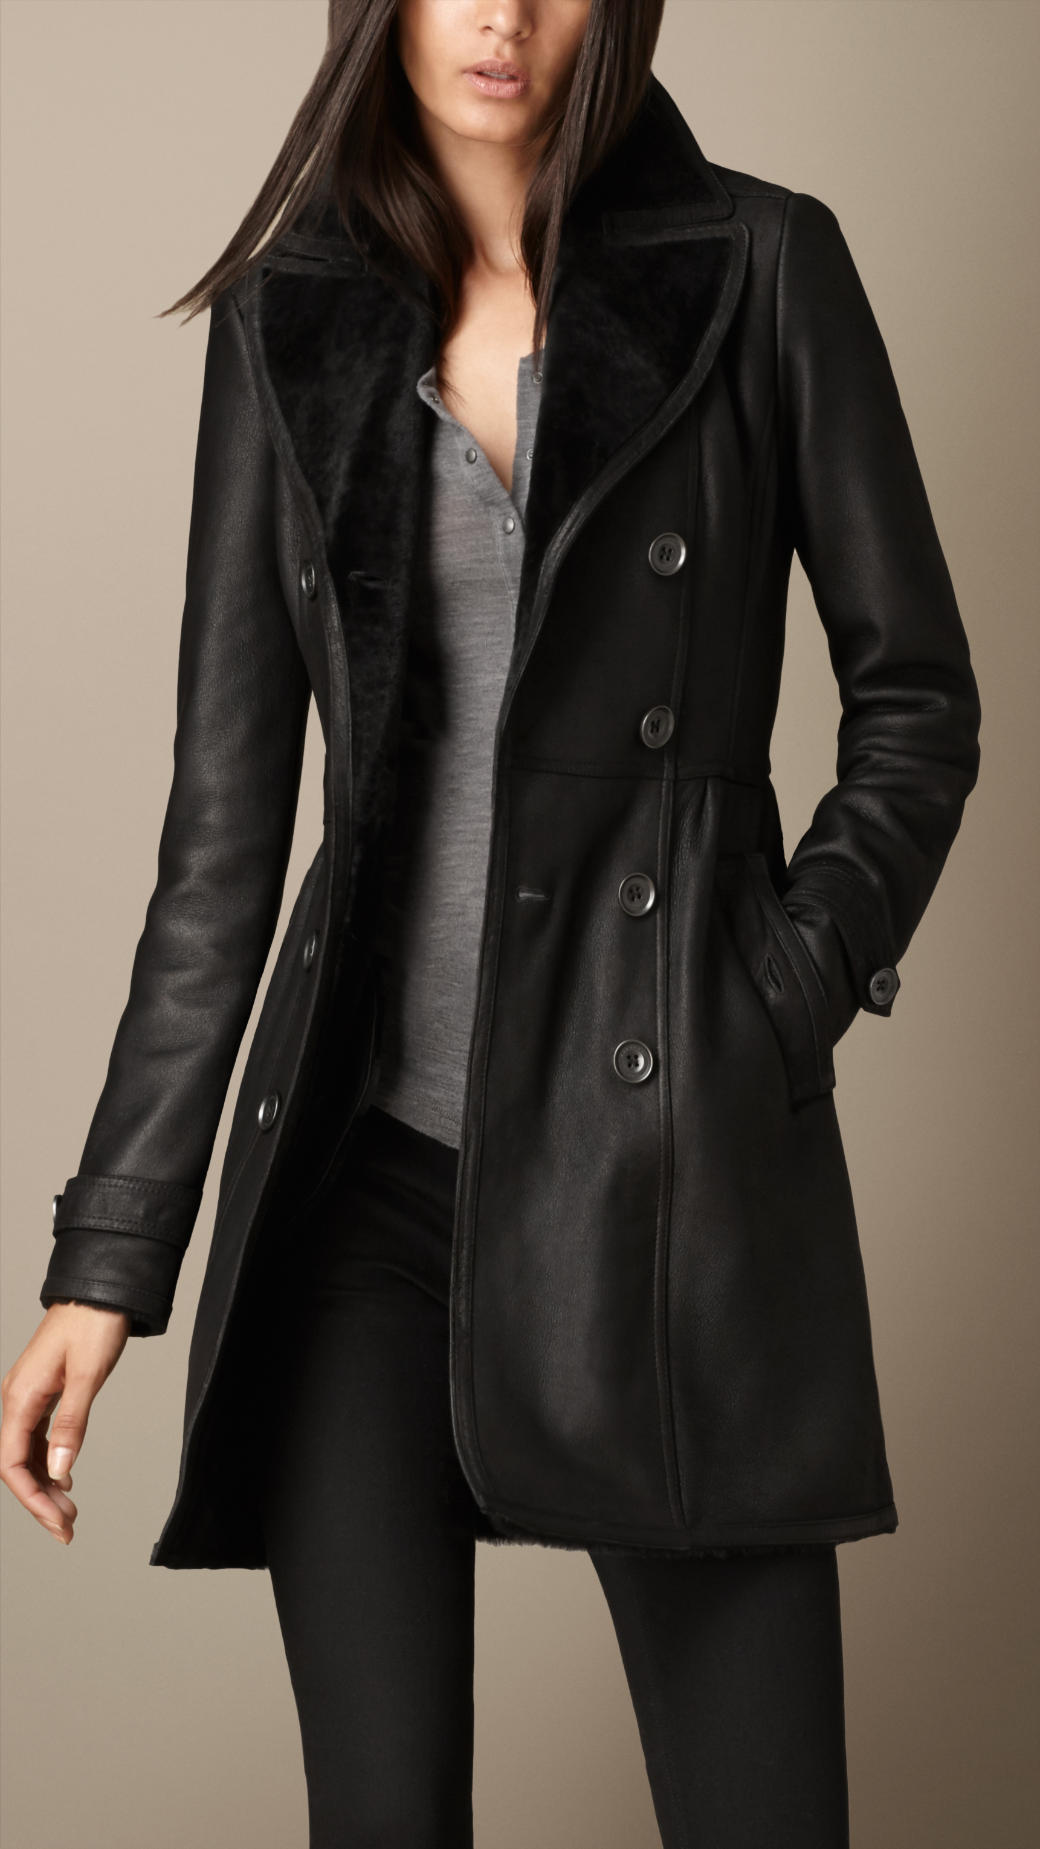 Lyst - Burberry Heritage Shearling Coat in Black